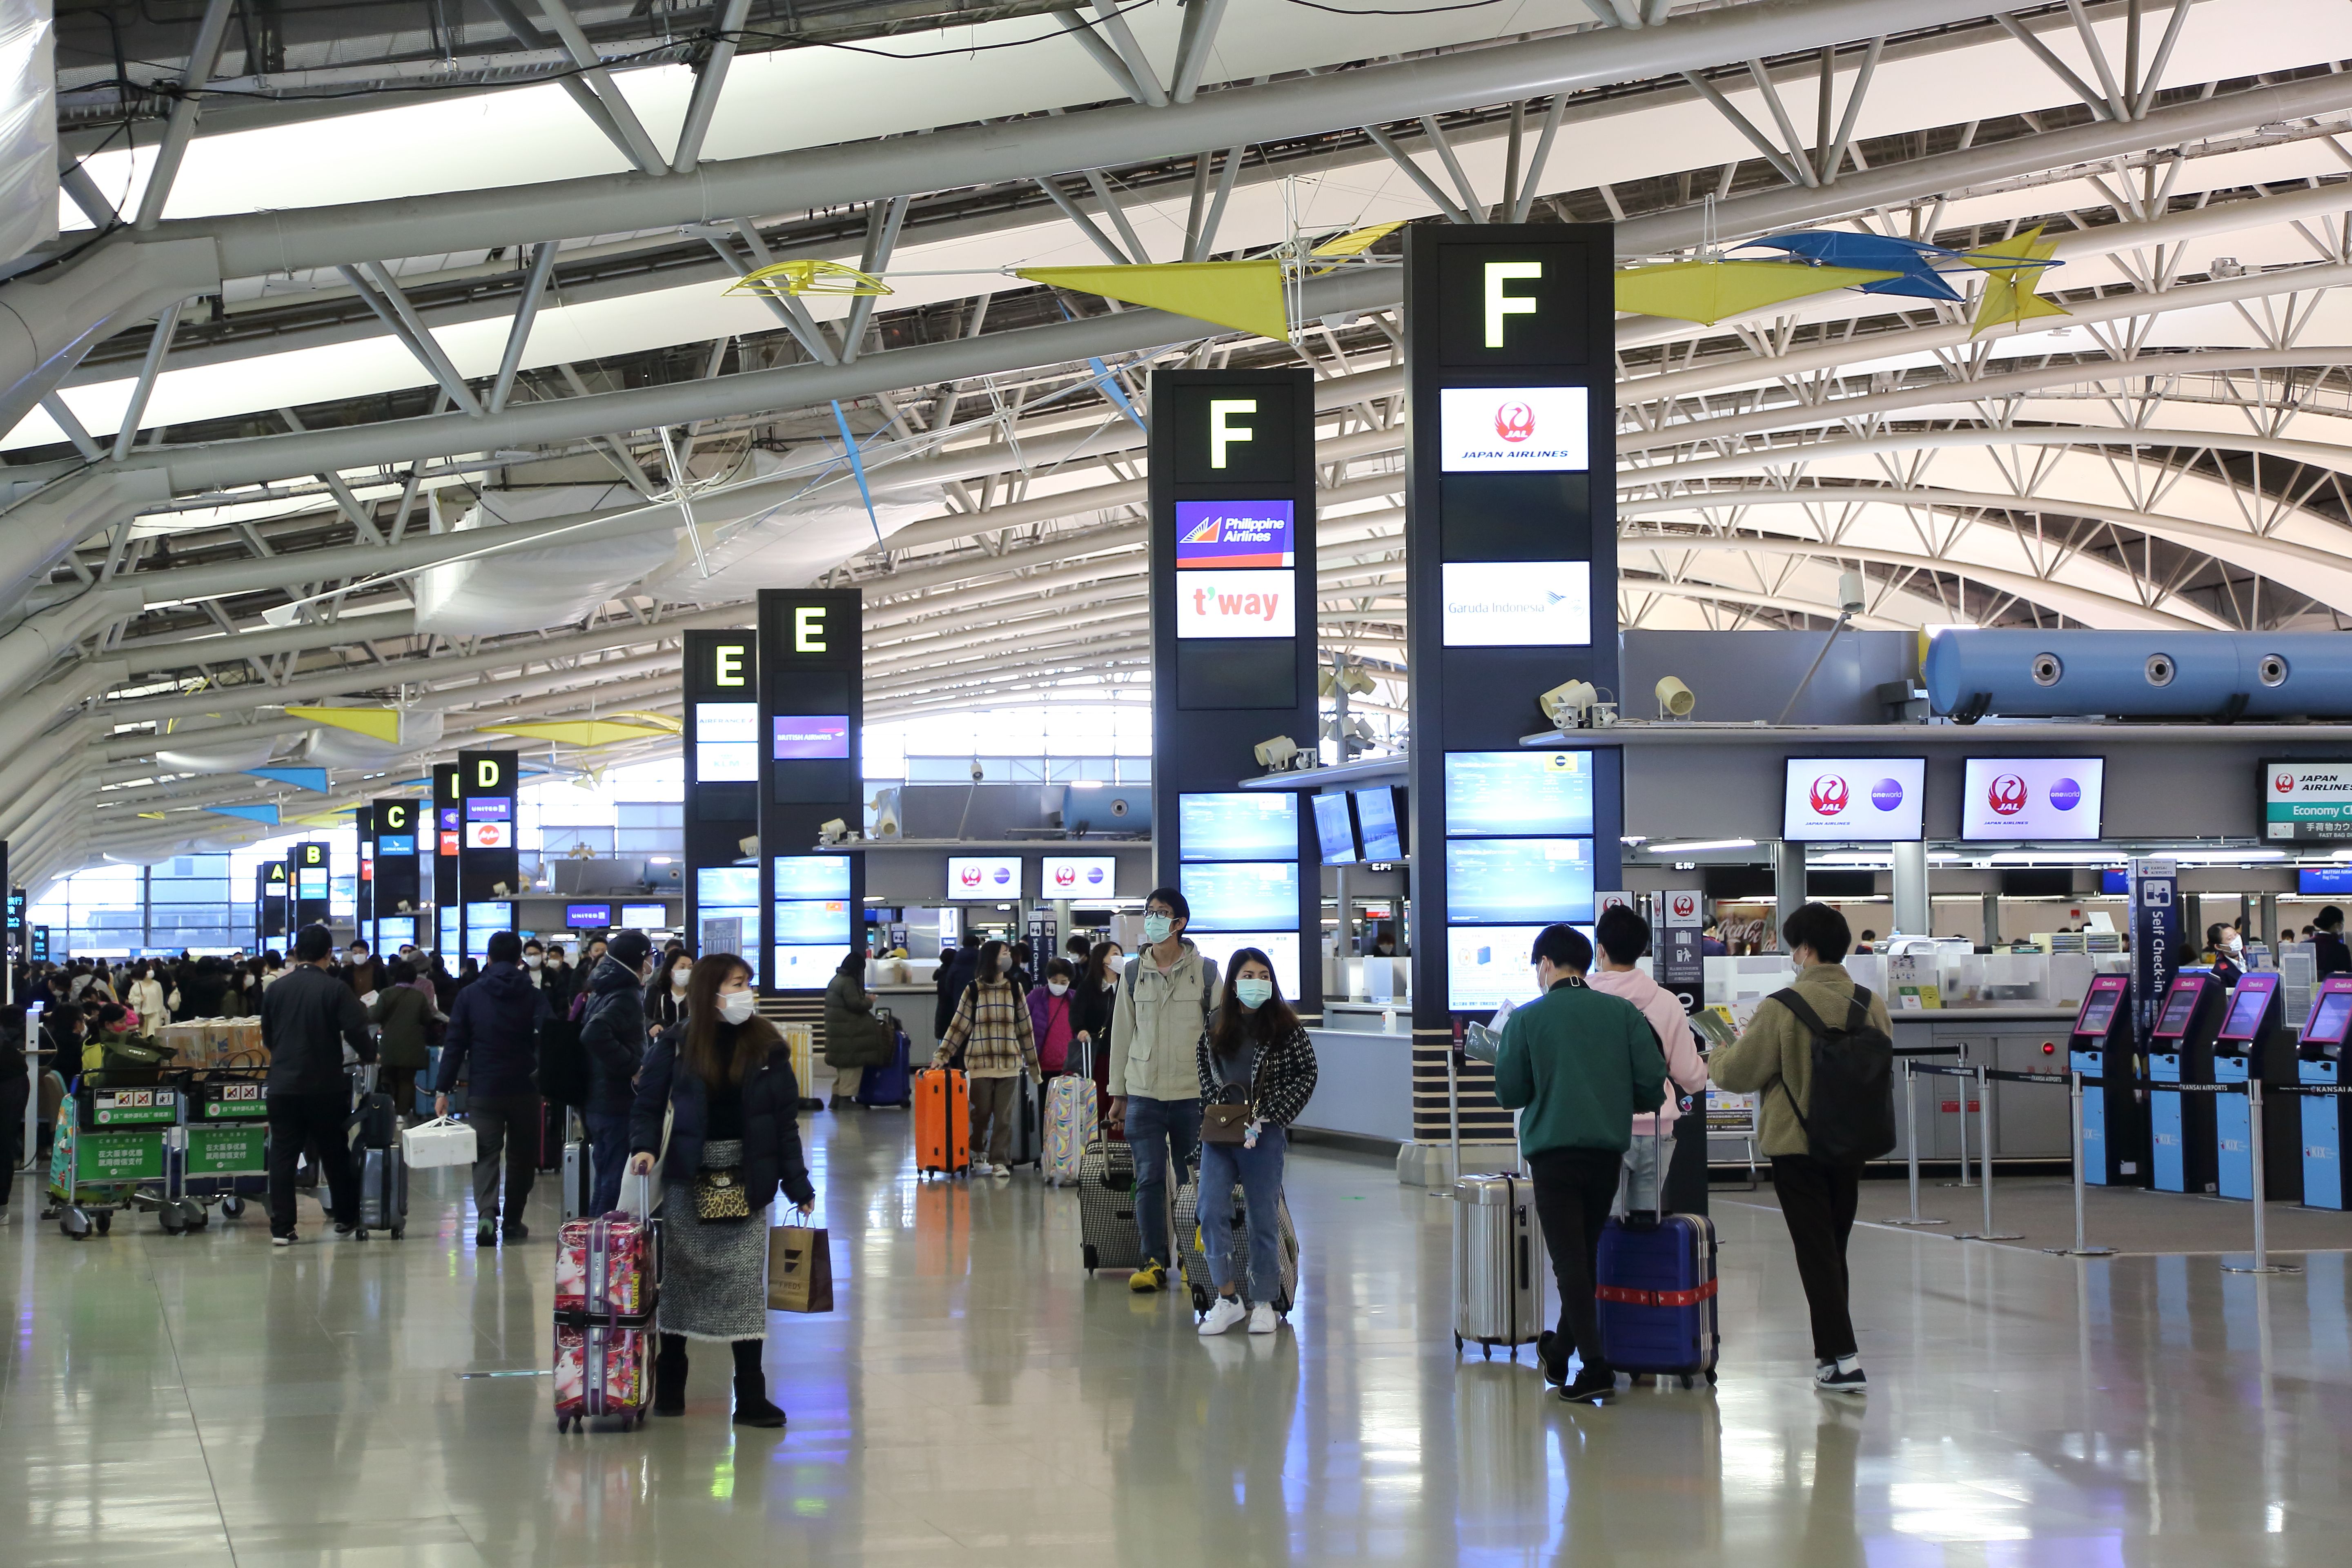 Inside the check in area of Kansai International Airport.